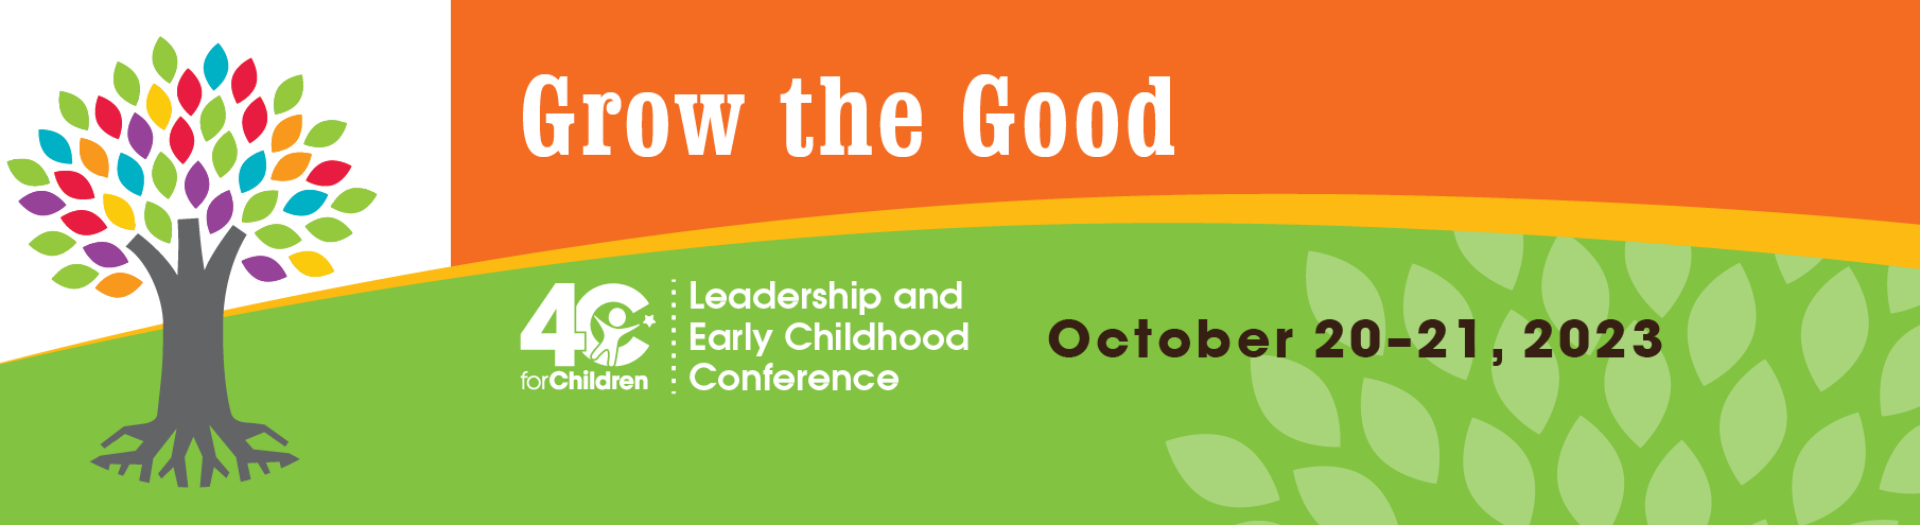 grow the good conference graphic